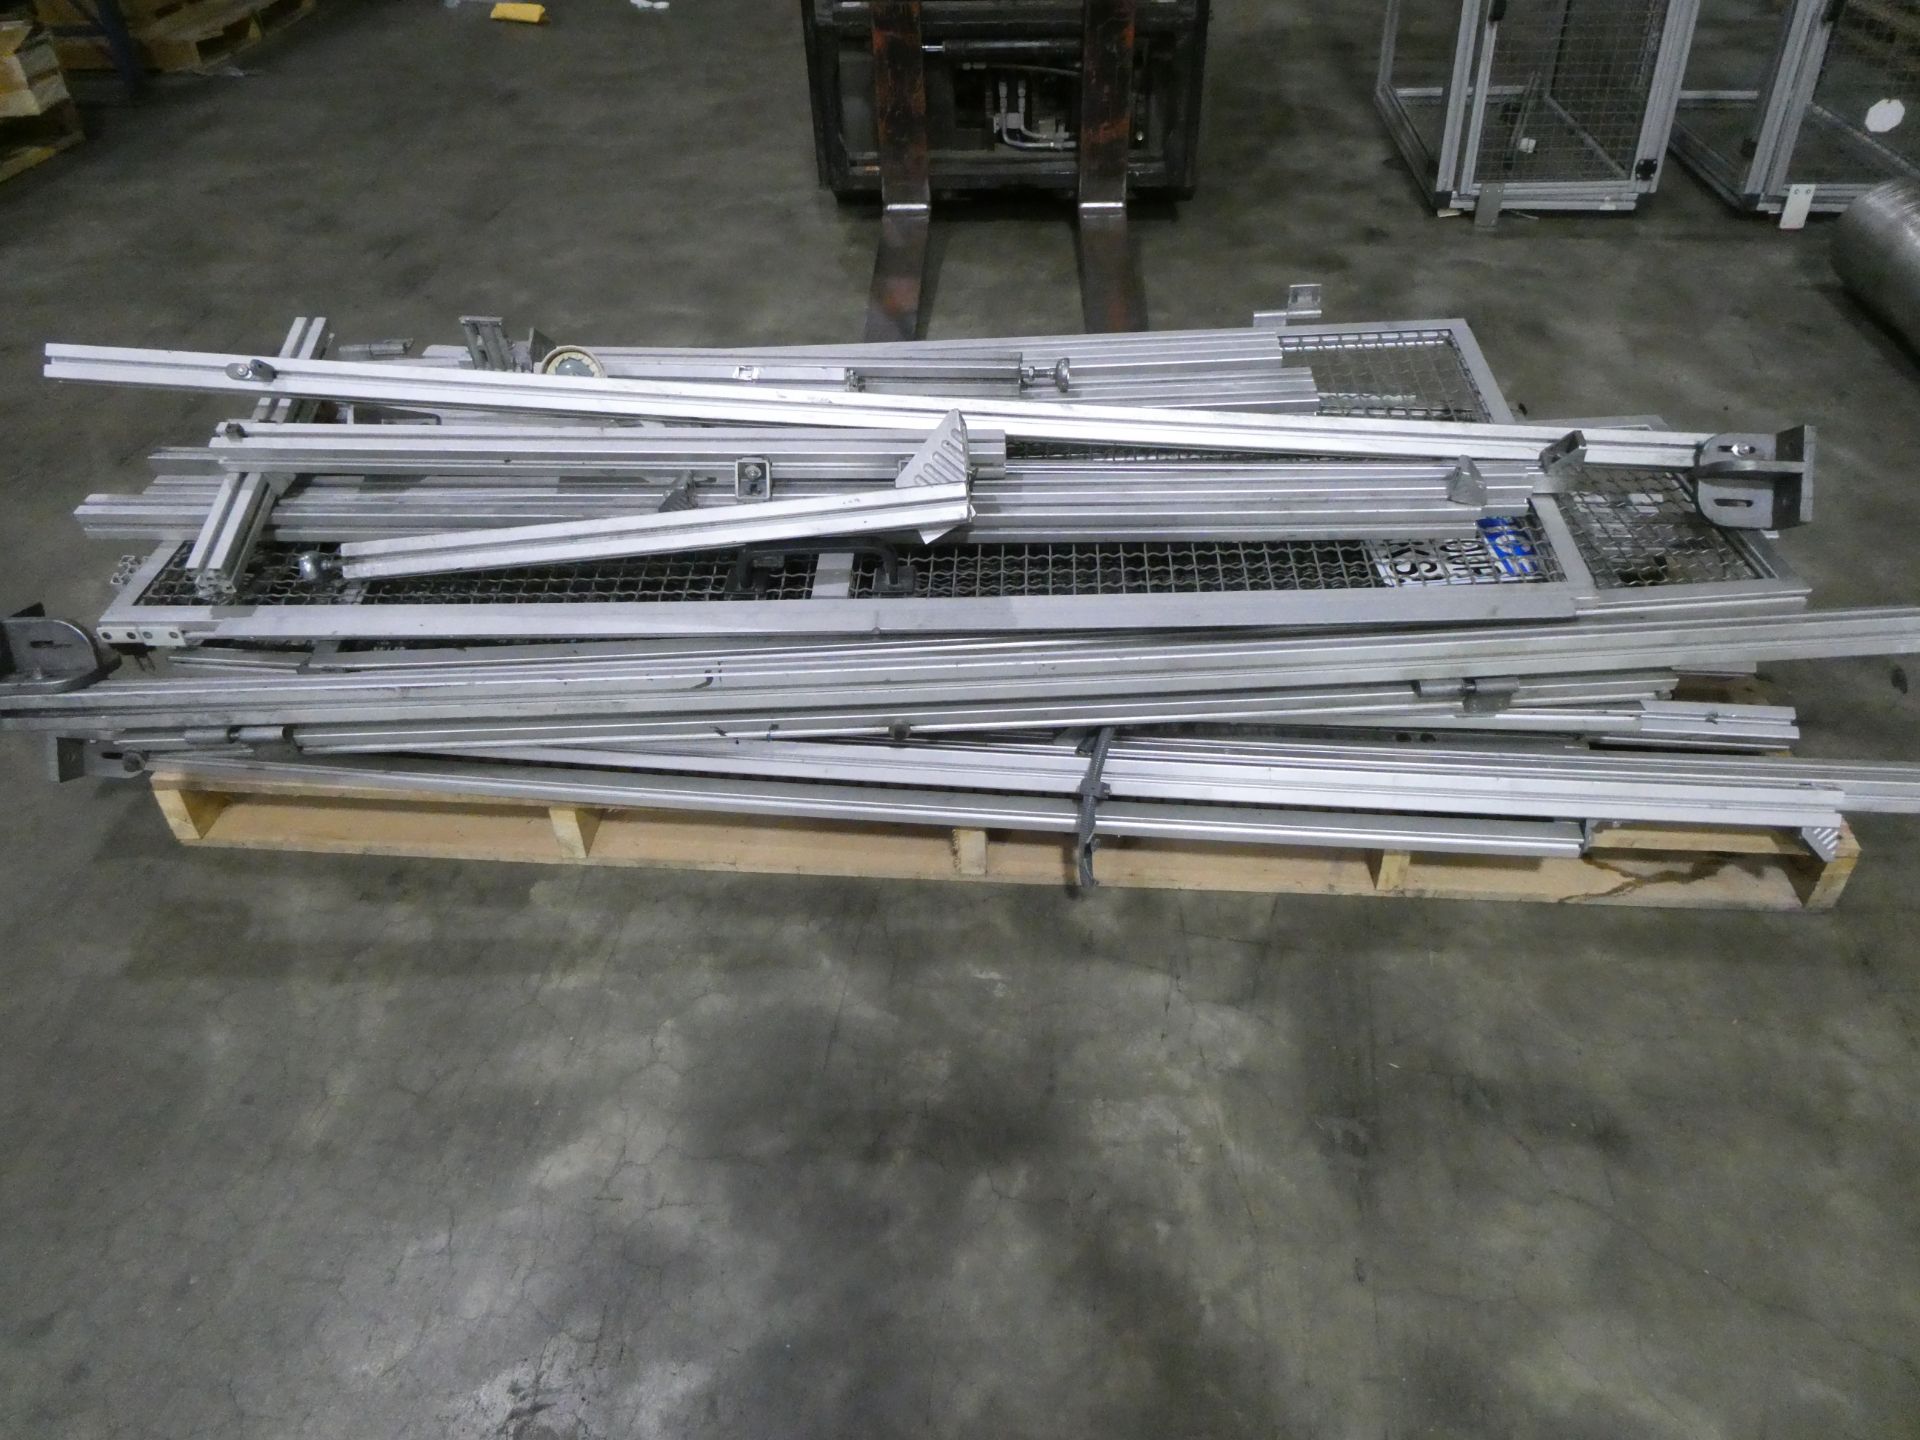 Aluminum Safety Cages, 8020 - Image 3 of 4